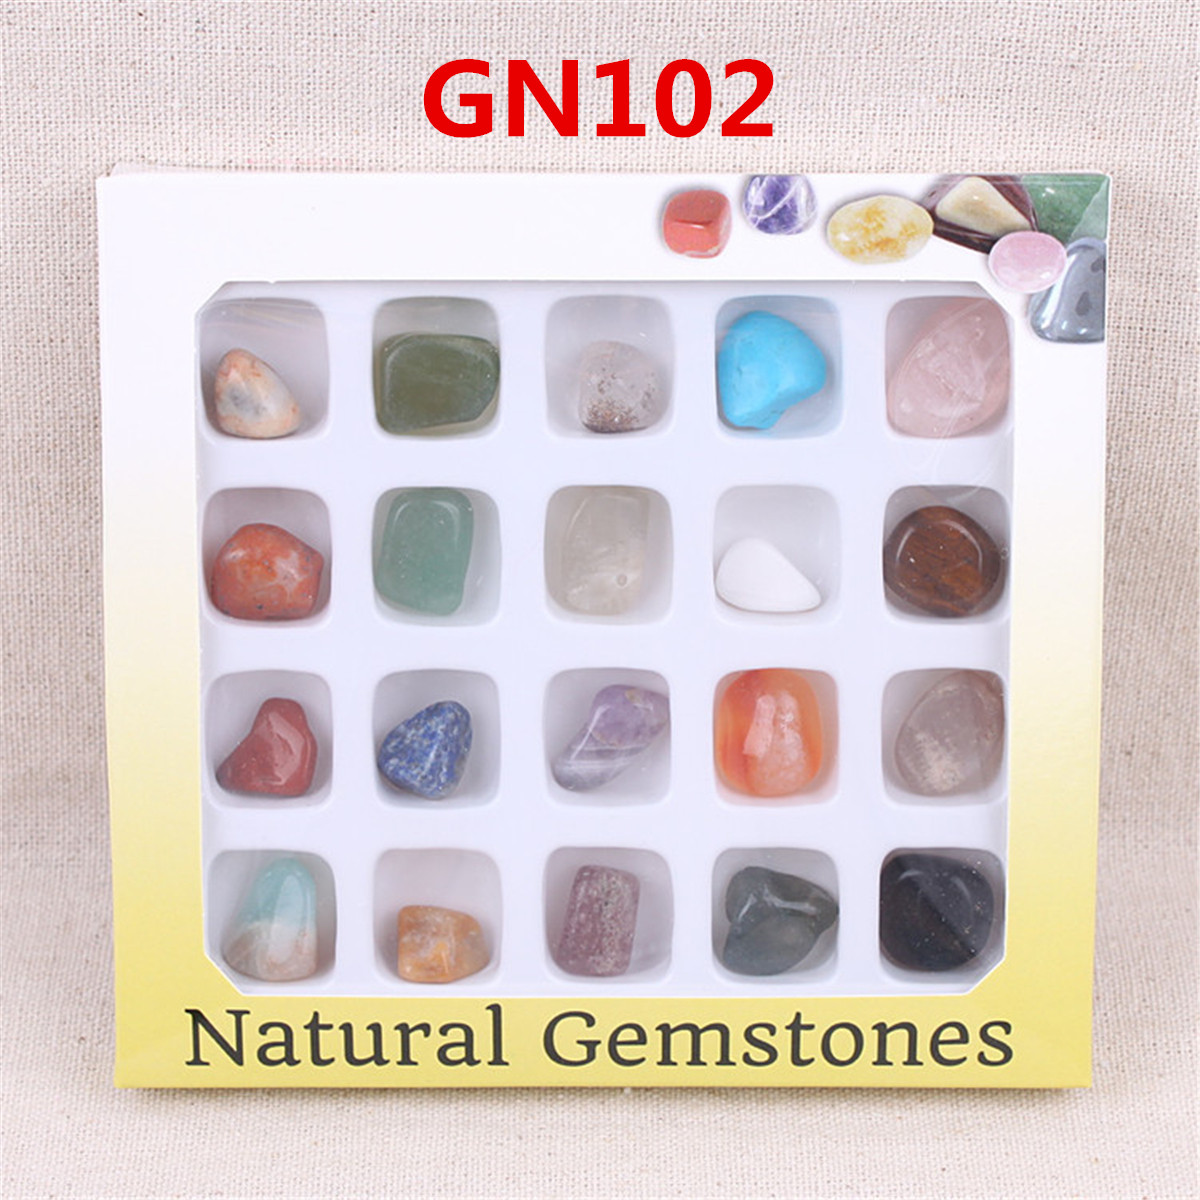 AU Natural Gemstones Stones Variety Collection Crystals Kit Mineral Geological Teaching Materials 15